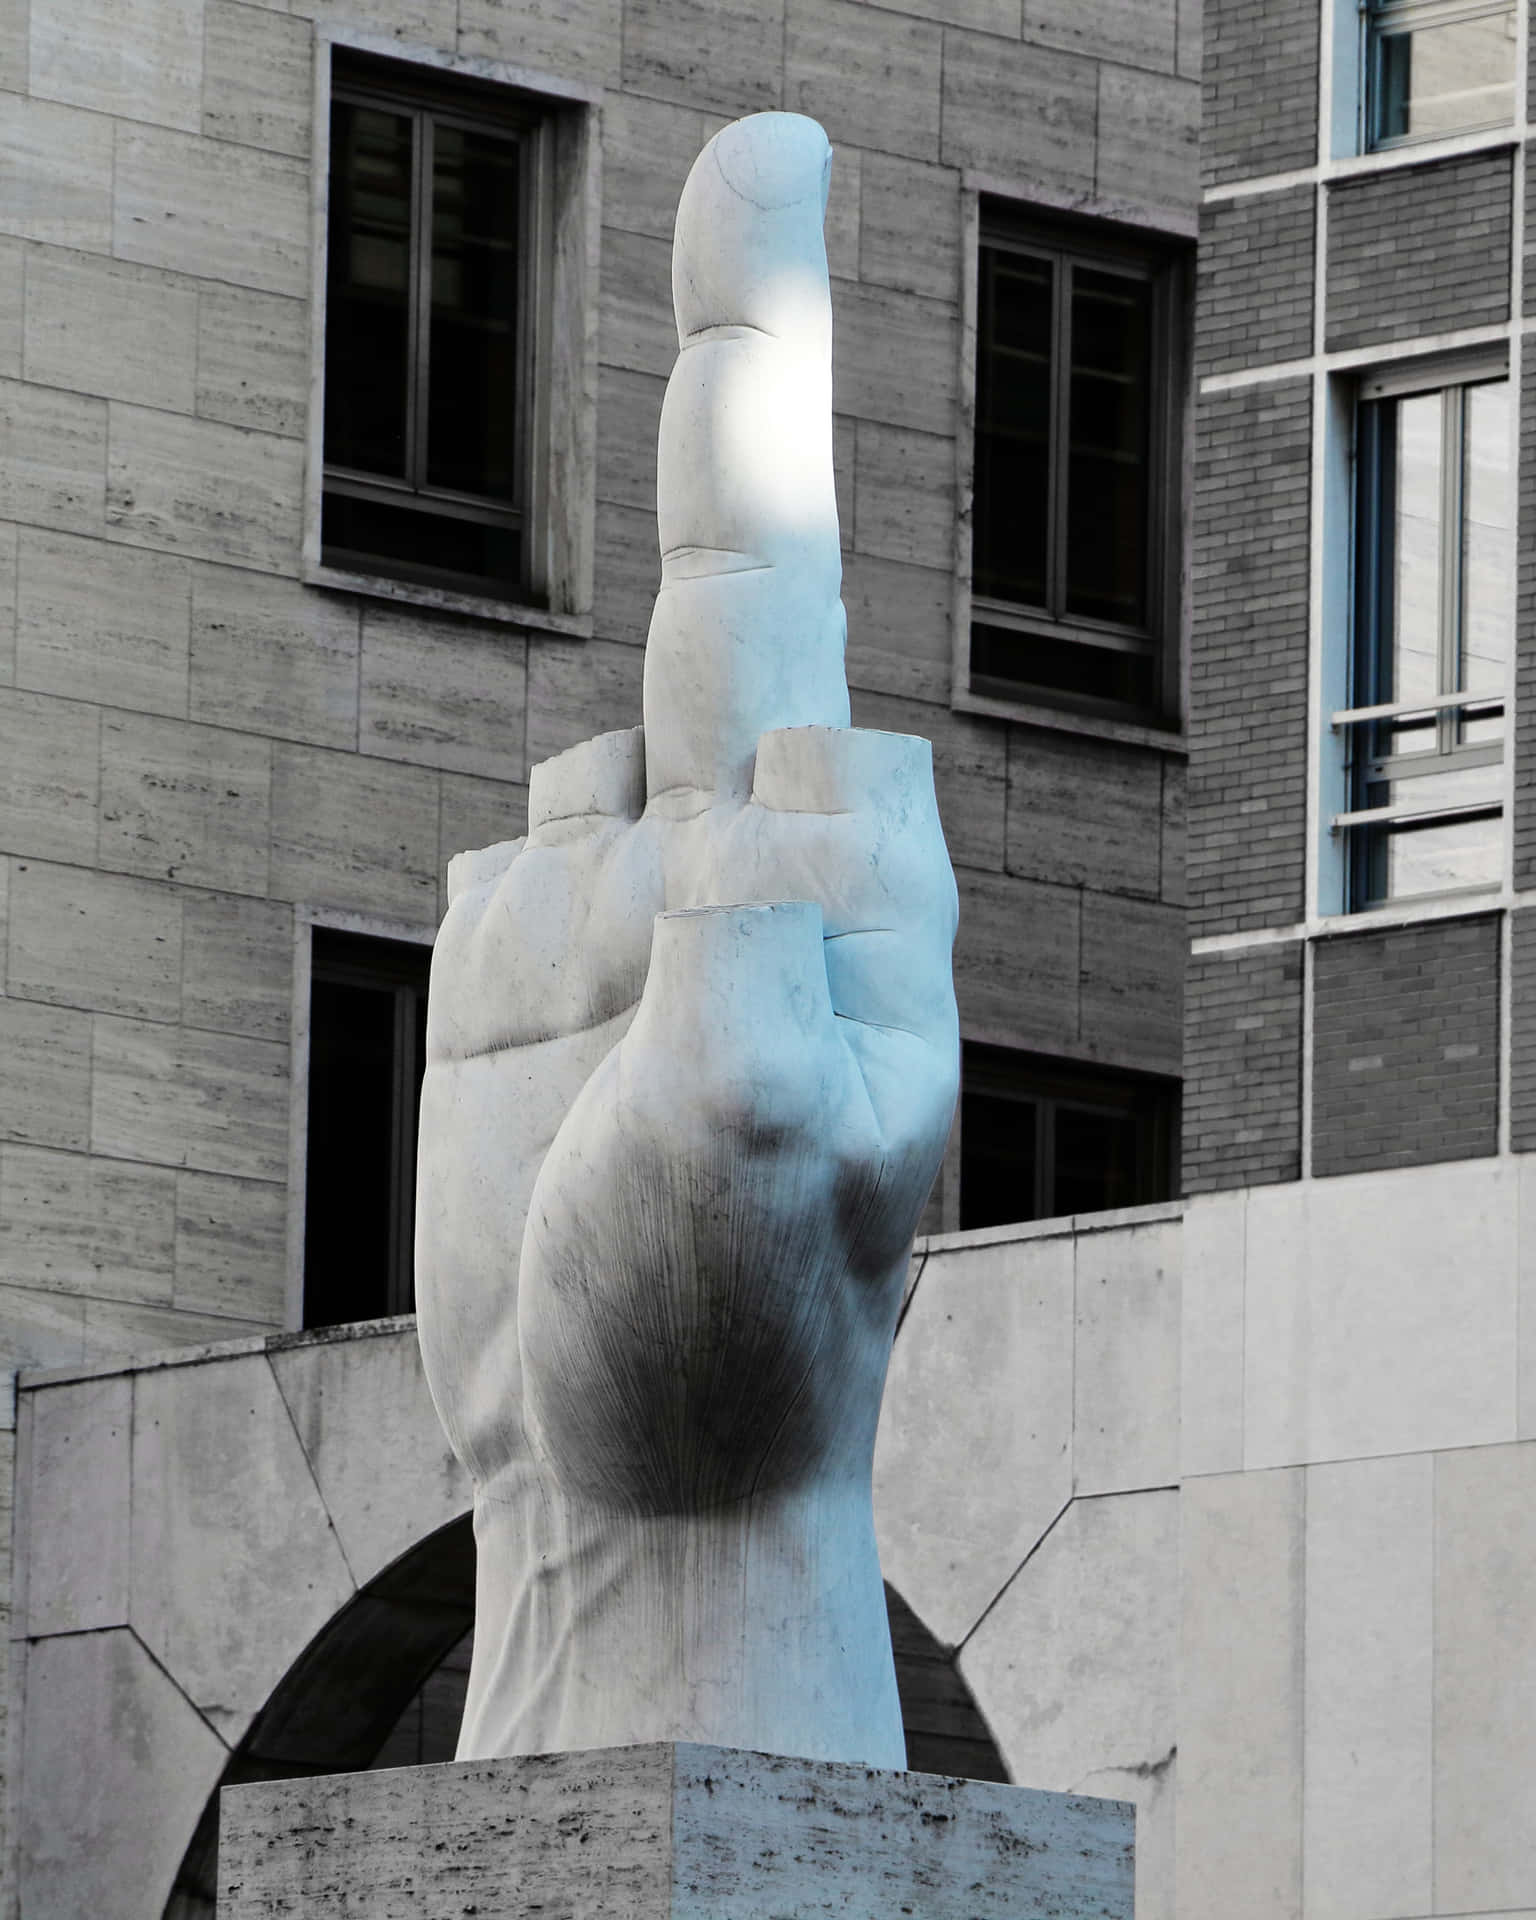 A Statue Of A Hand